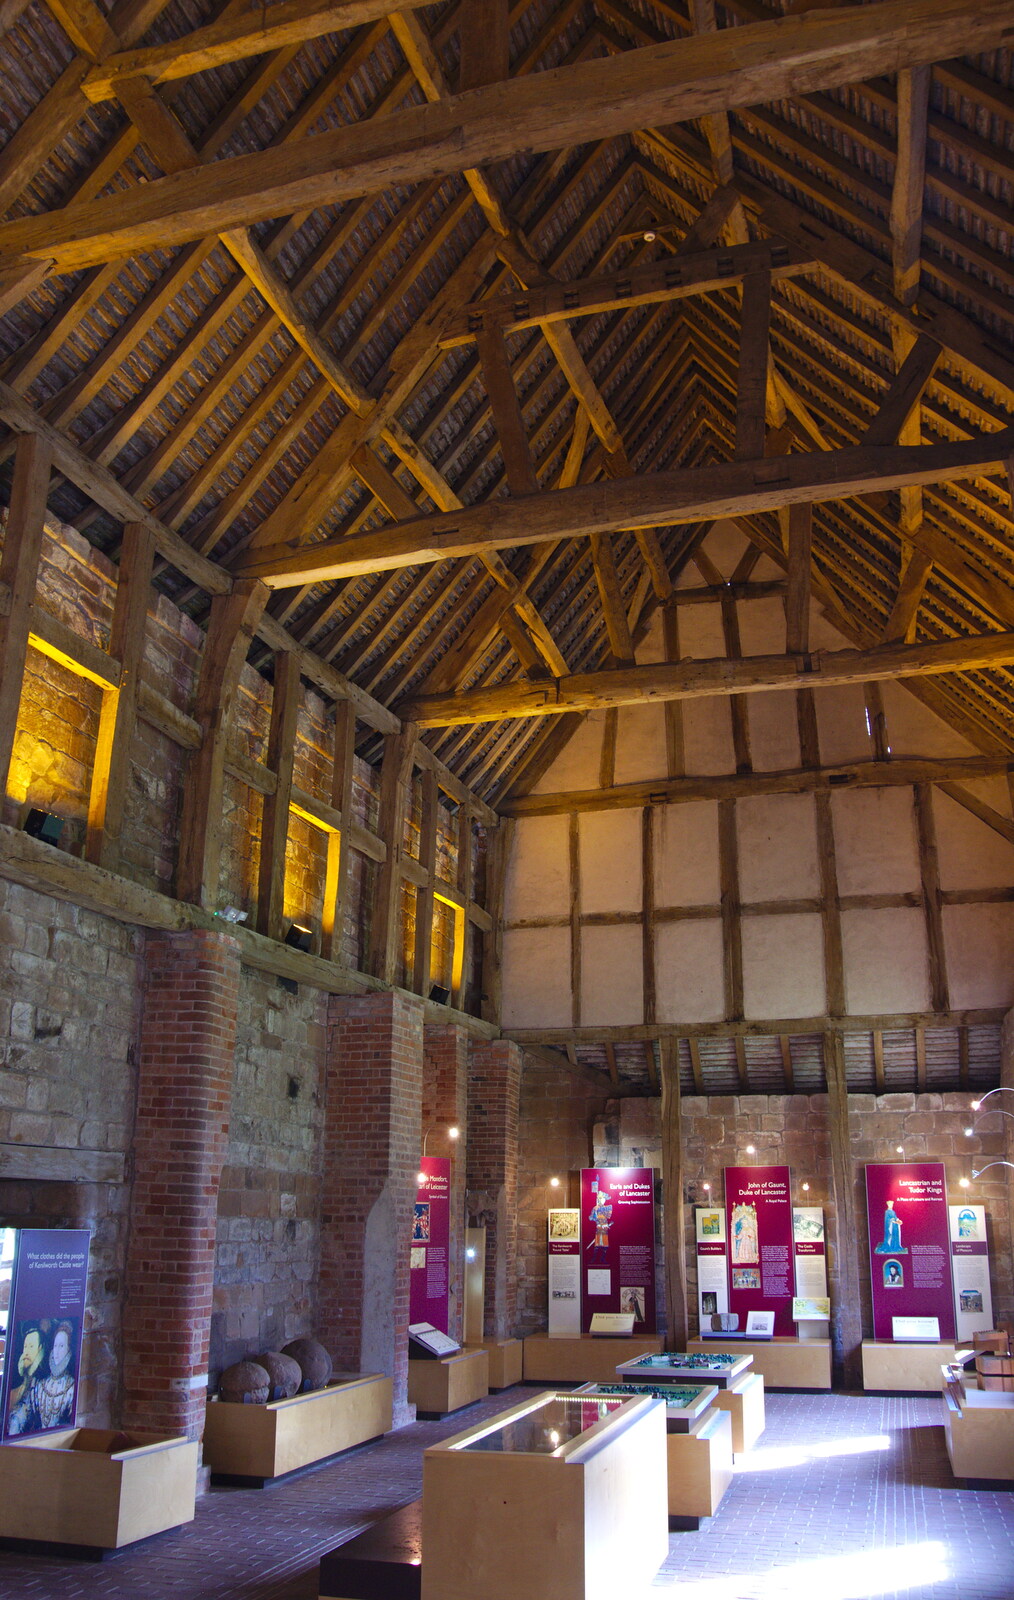 inside the stables - now the visitors' centre from Kenilworth Castle and the 69th Entry Reunion Dinner, Stratford, Warwickshire - 14th September 2019